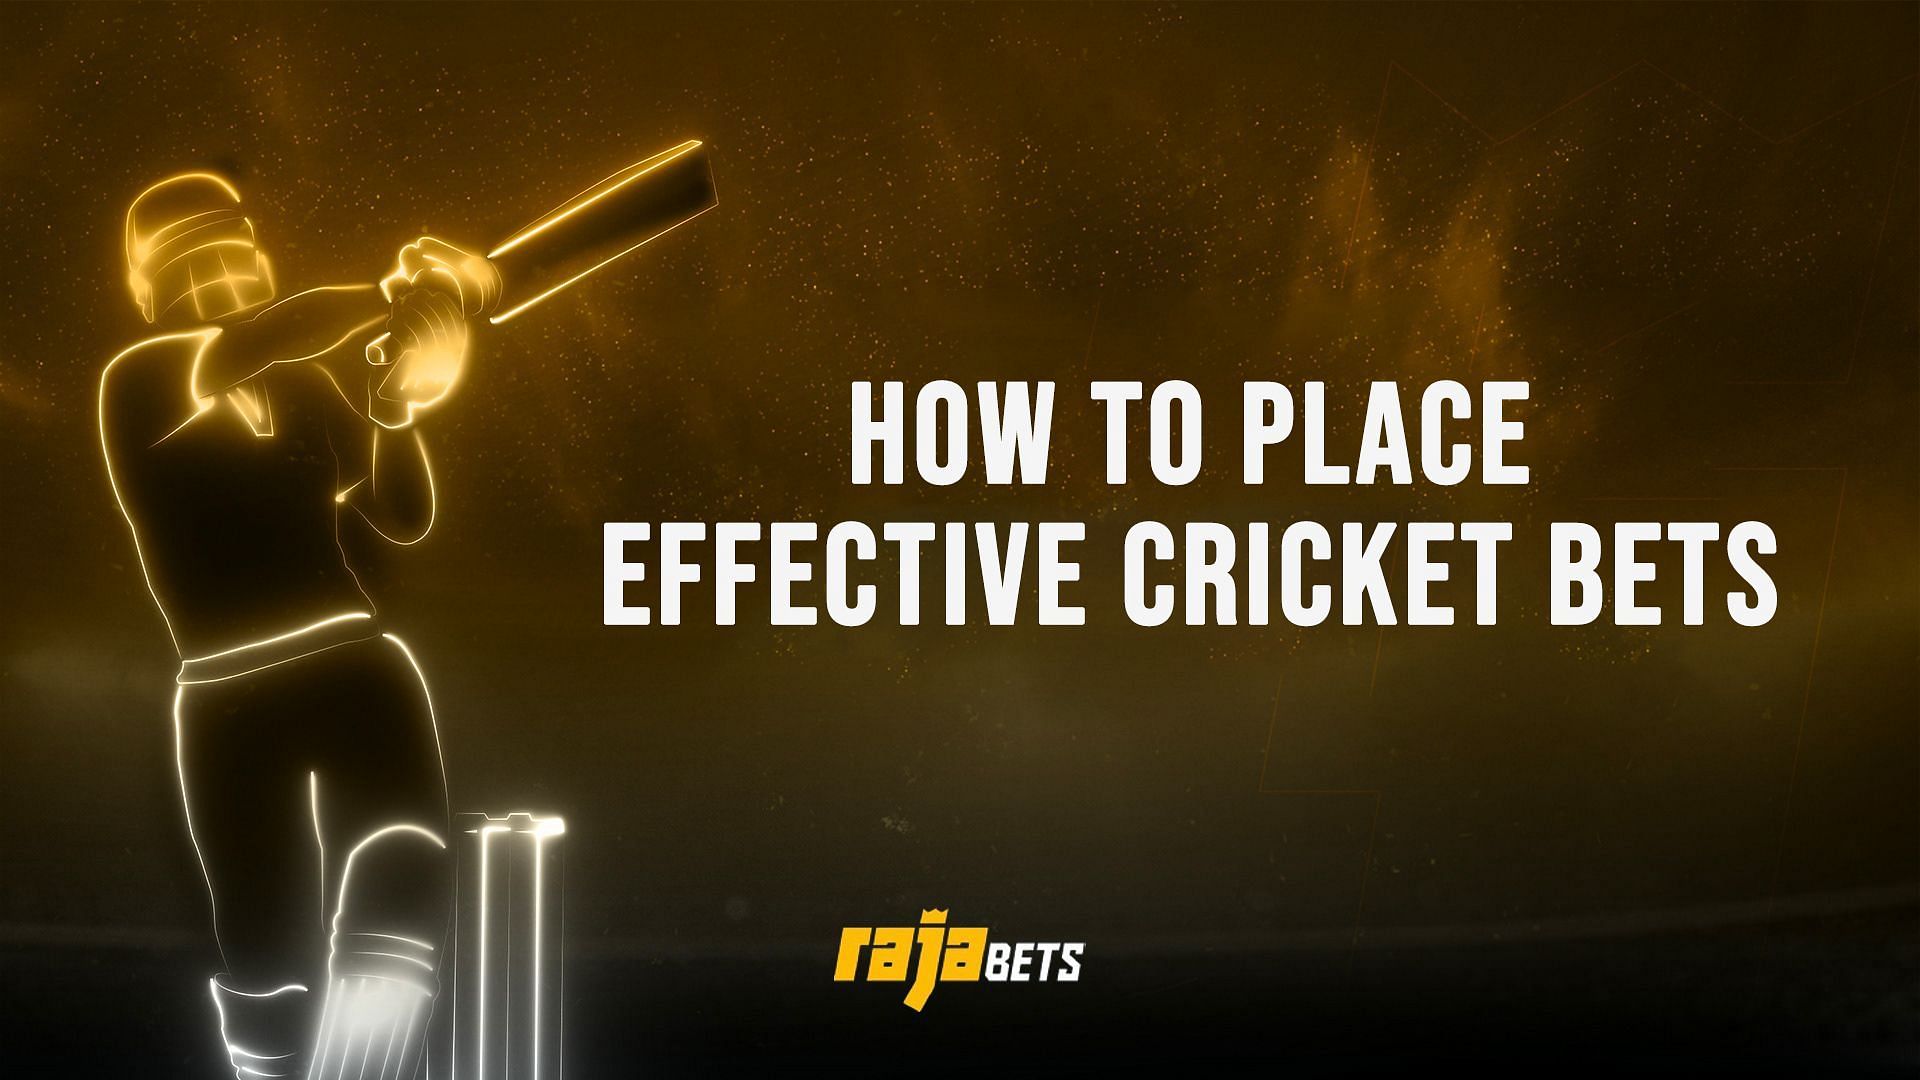 Top 10 Cricket Betting Apps In India An Incredibly Easy Method That Works For All